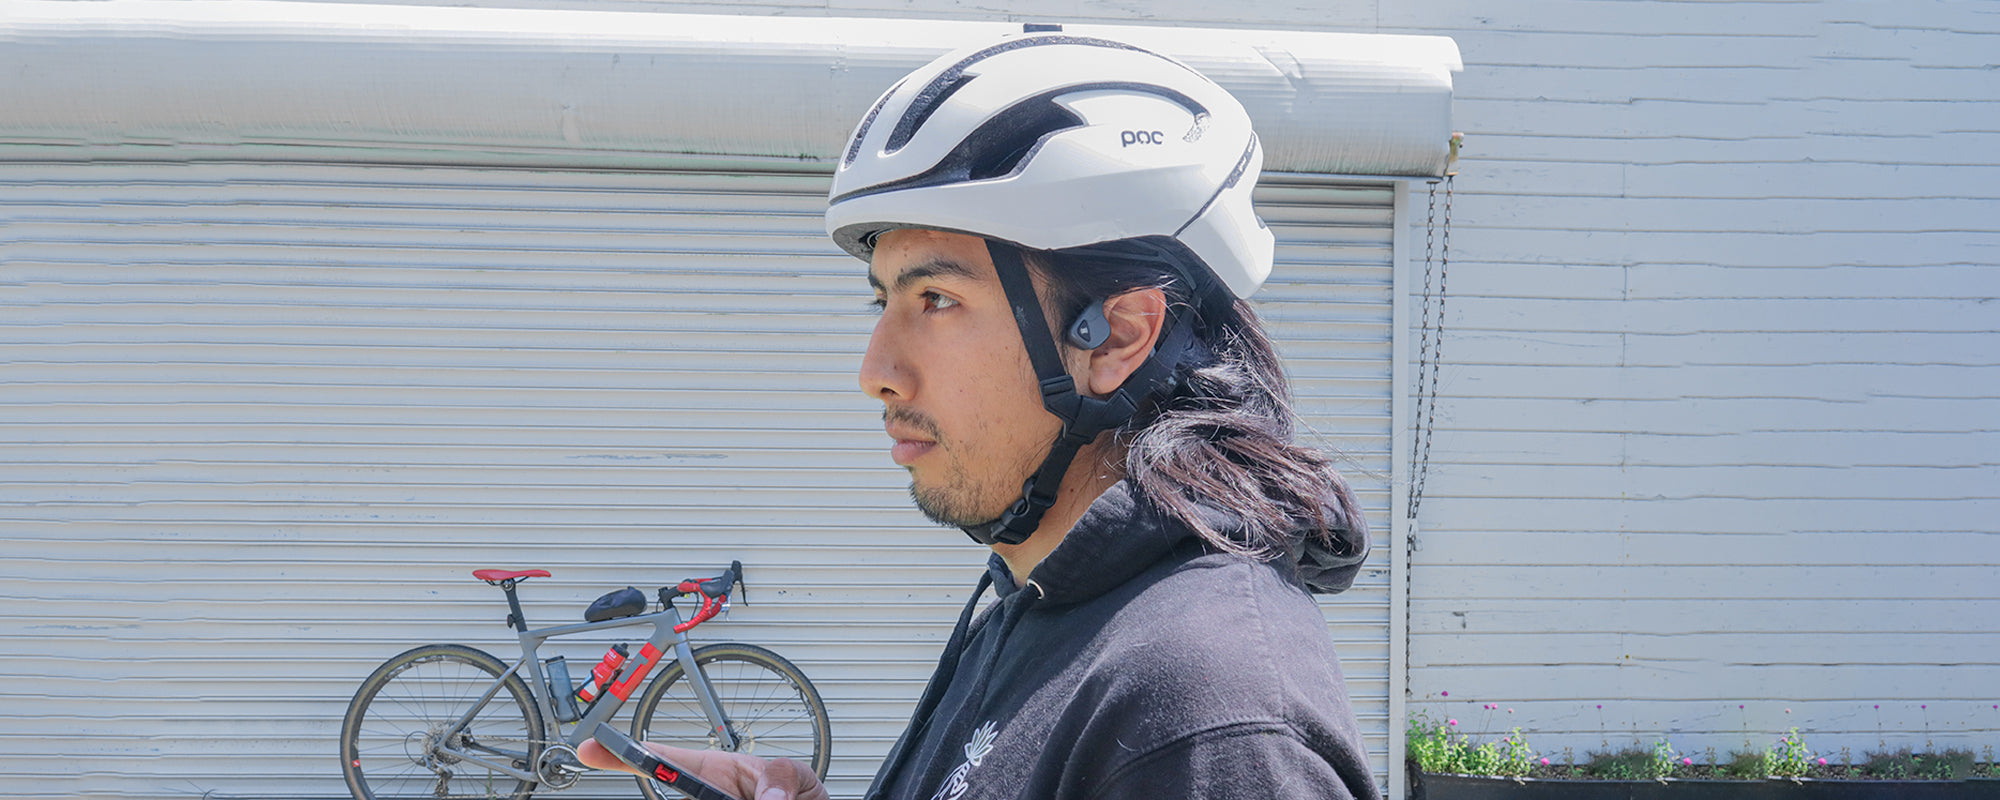 How Bone Conduction Technology Made Me A Safer Cyclist